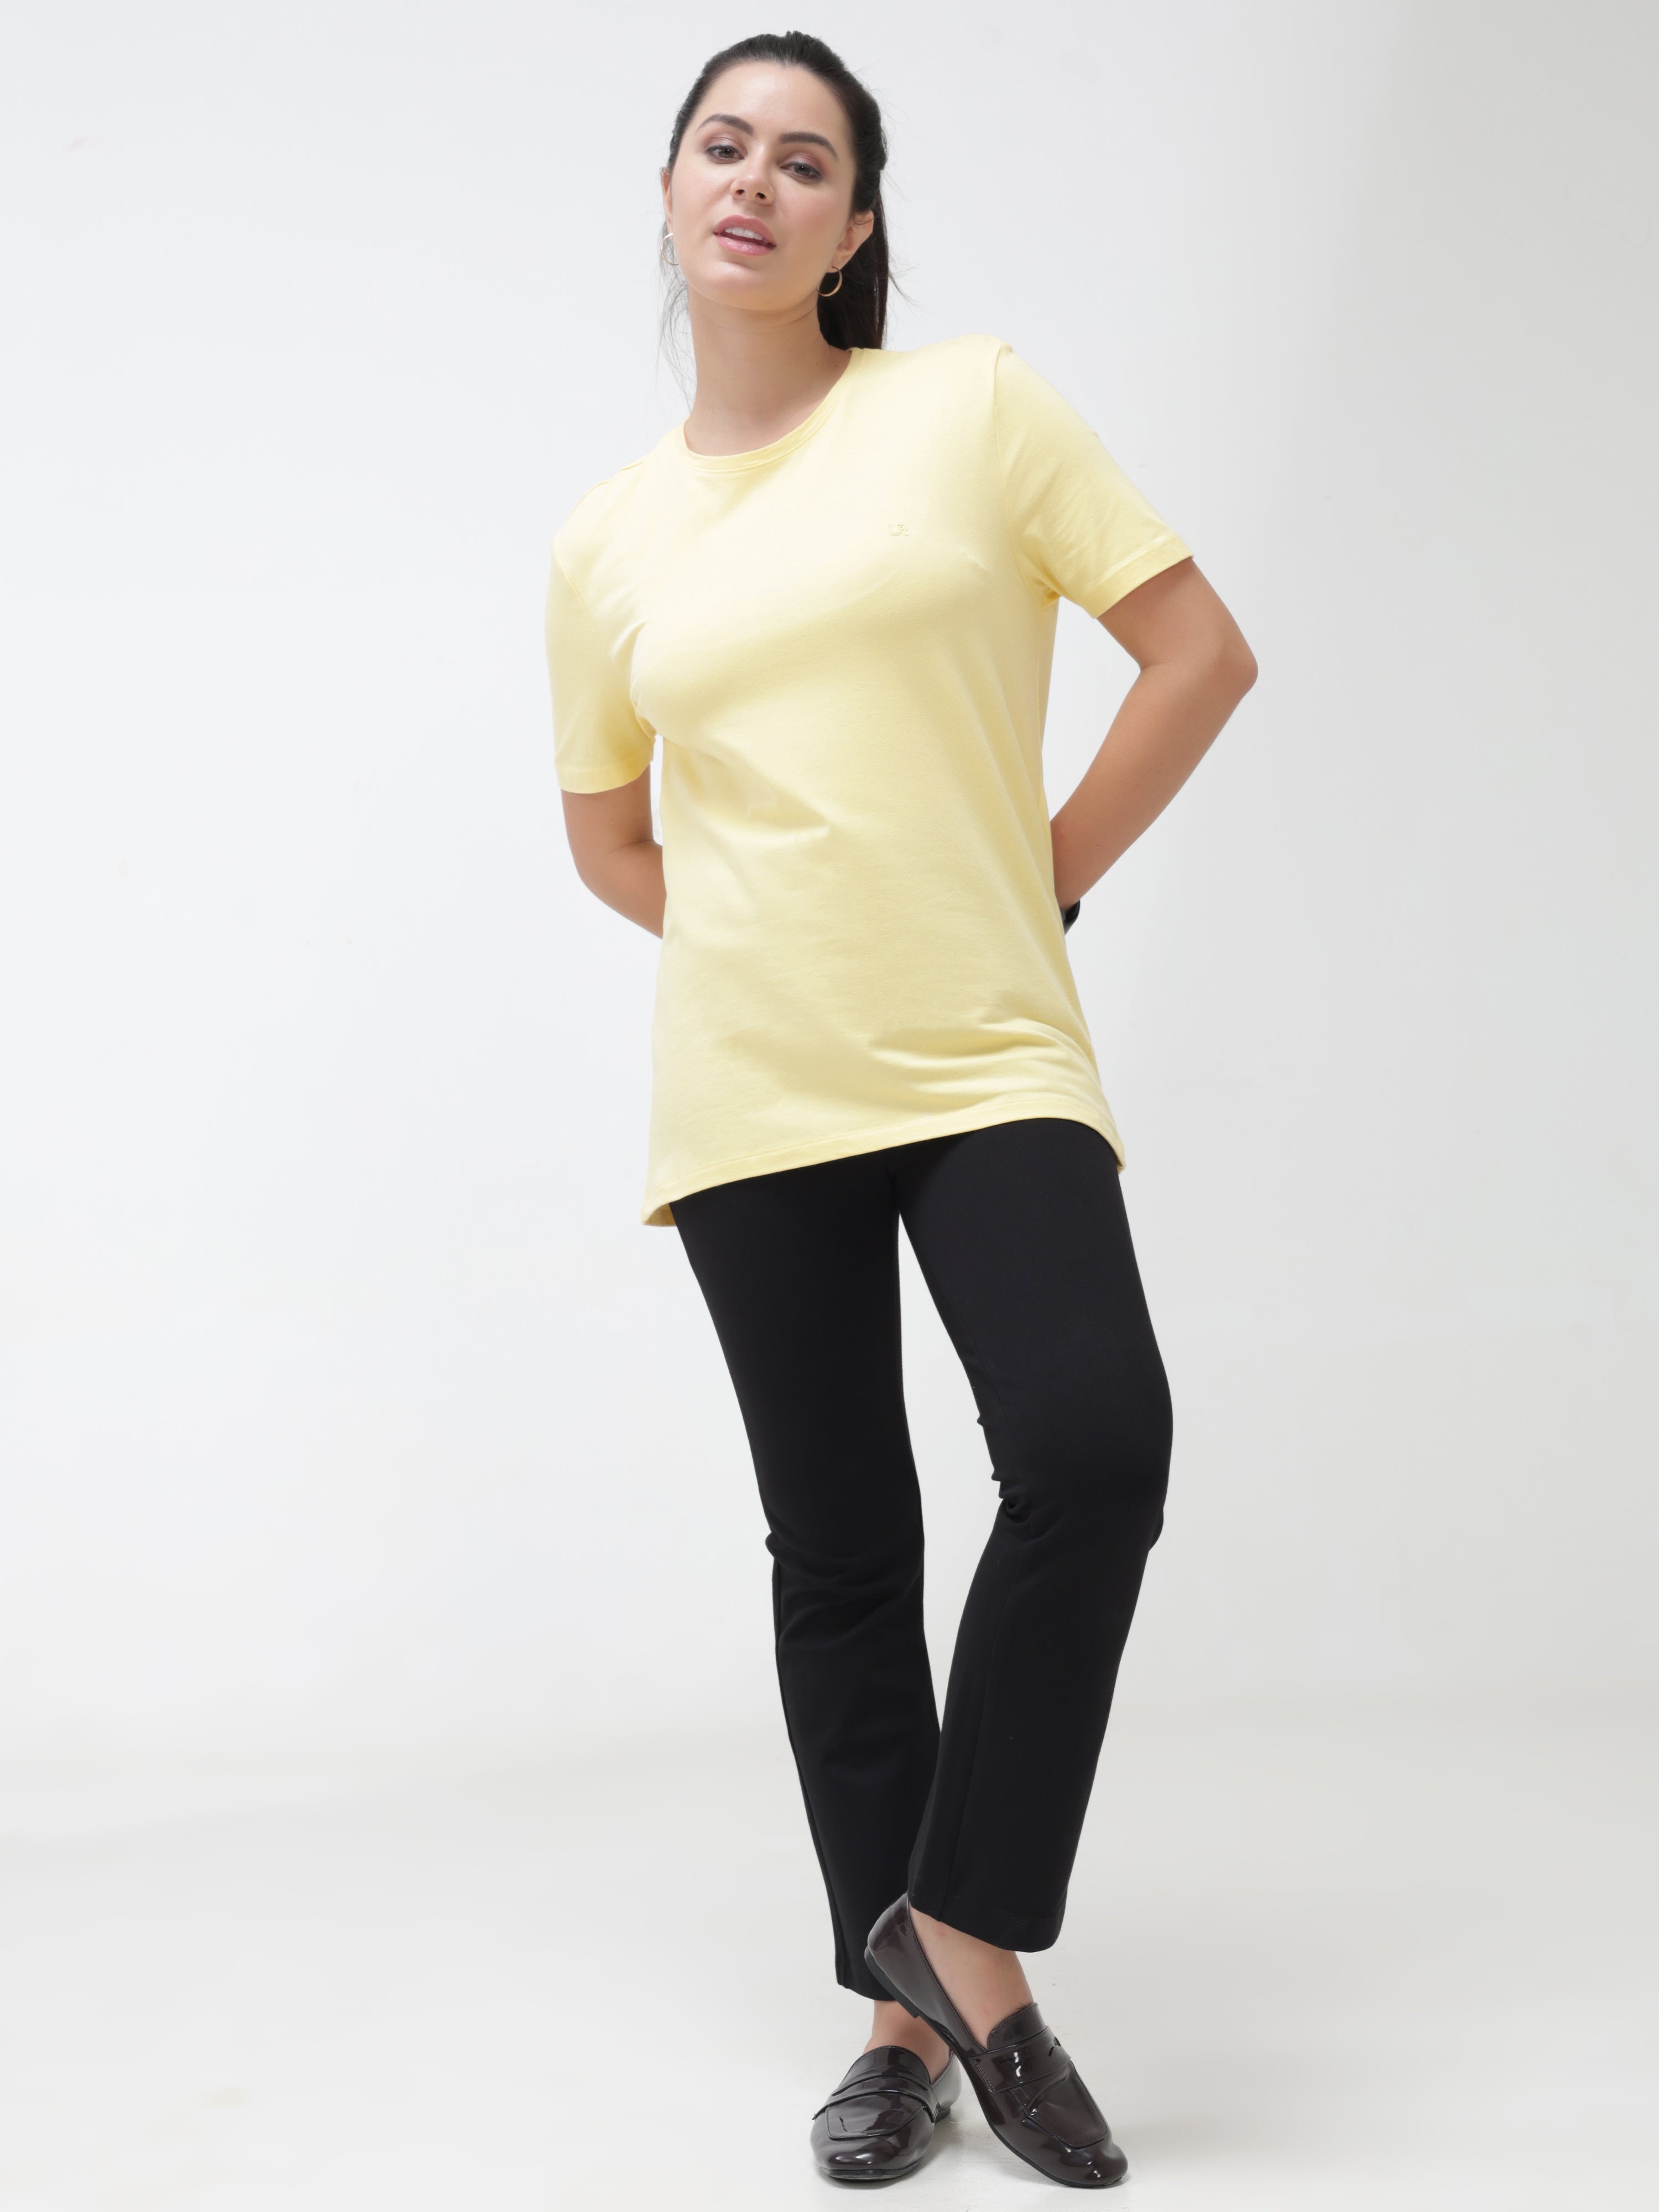 Woman wearing a stylish yellow round-neck t-shirt and black pants, showcasing casual wear for women